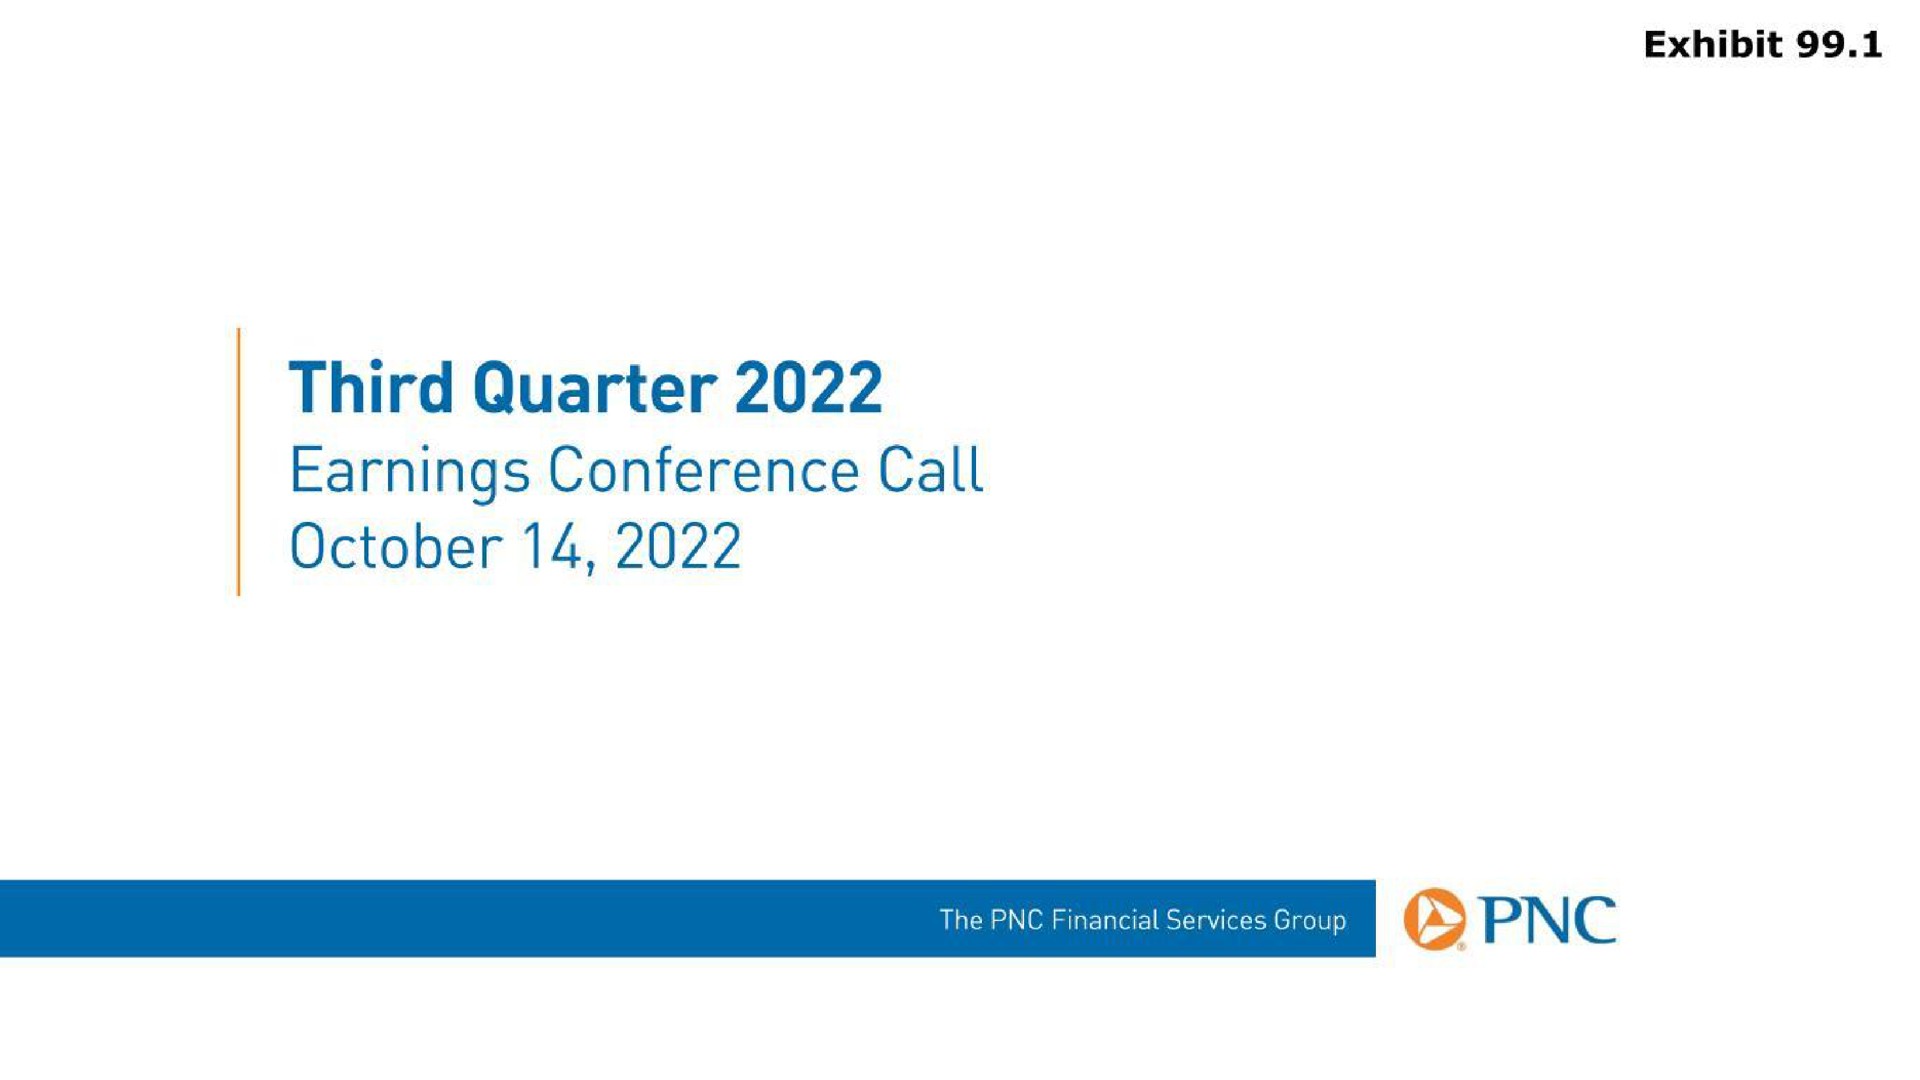 third quarter earnings conference call | PNC Financial Services Group